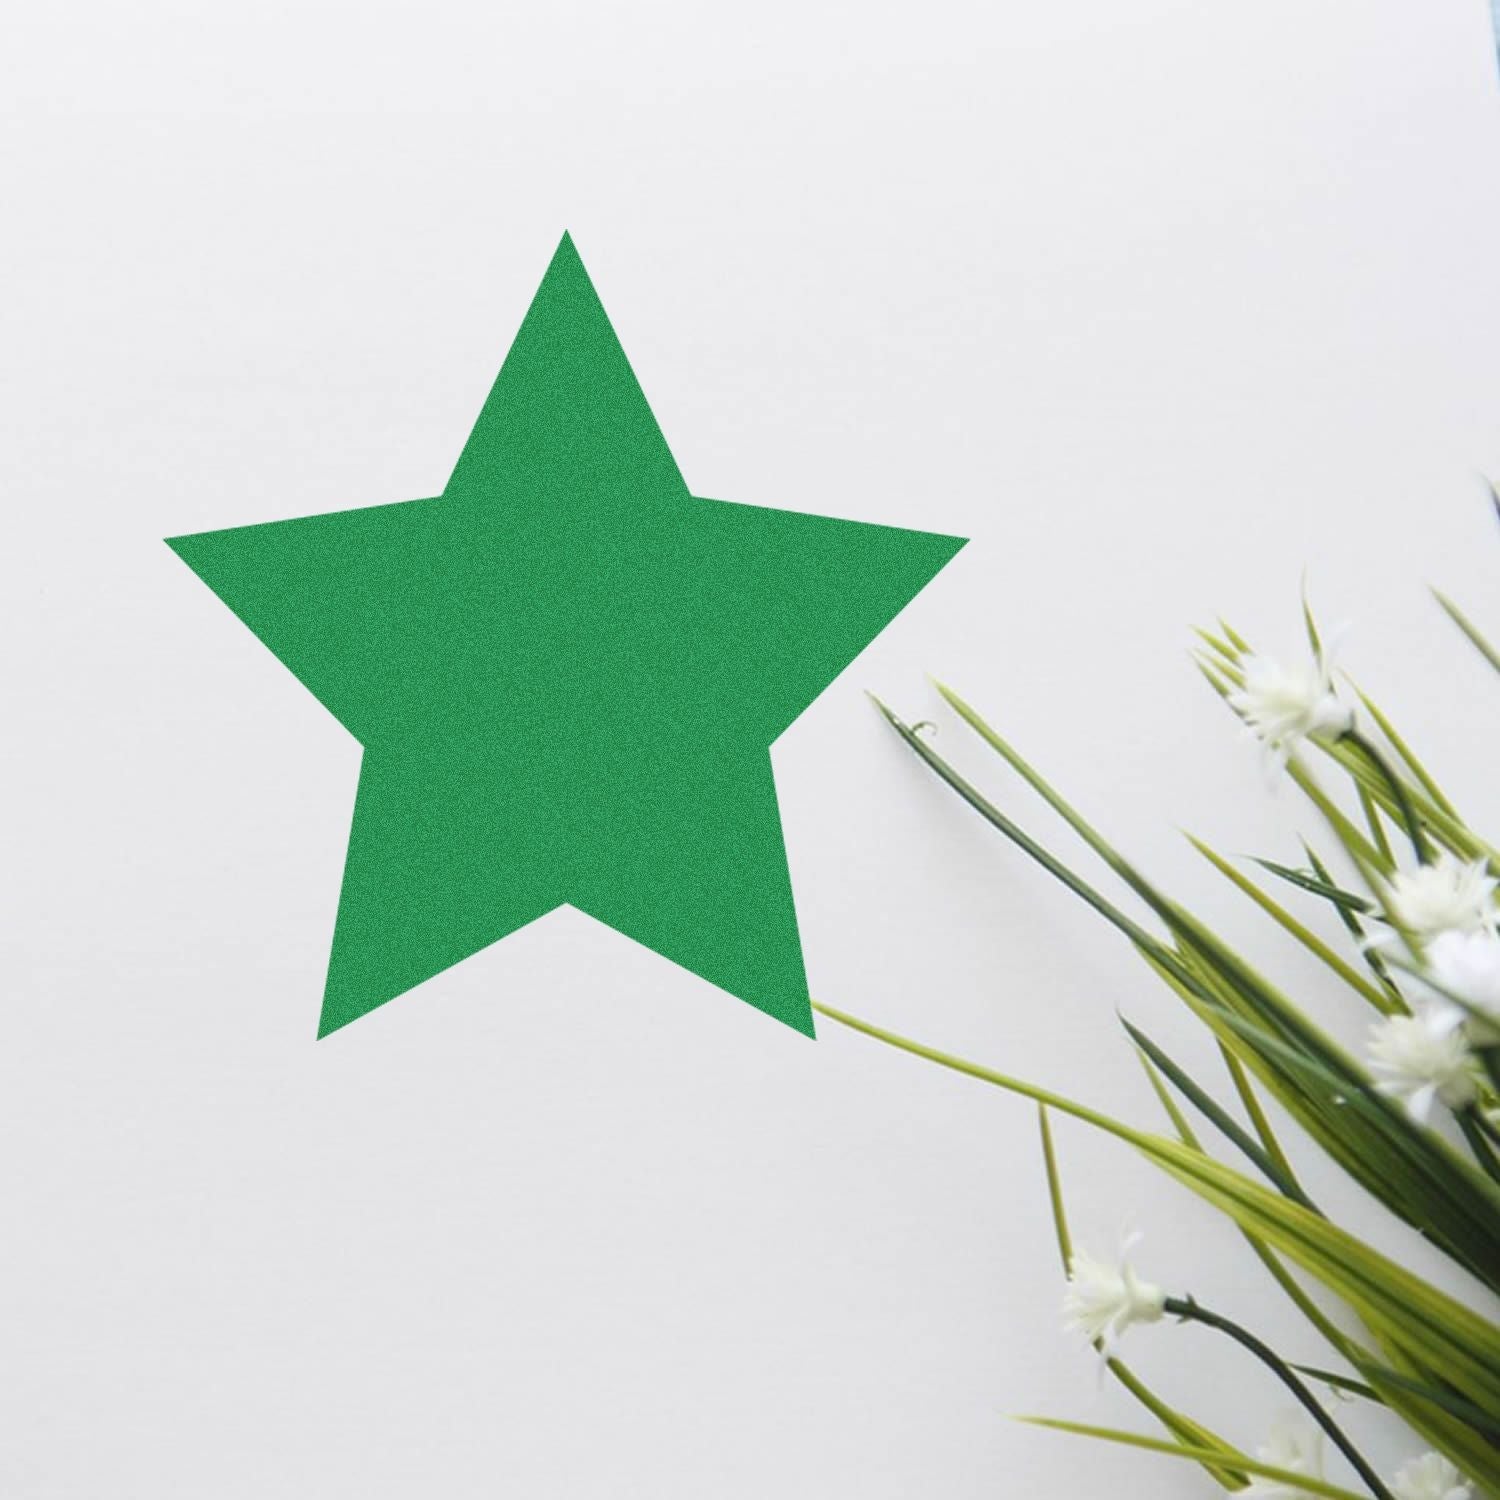 Mint Green Solid Star Stamp for Creative Decor and Craft Projects 